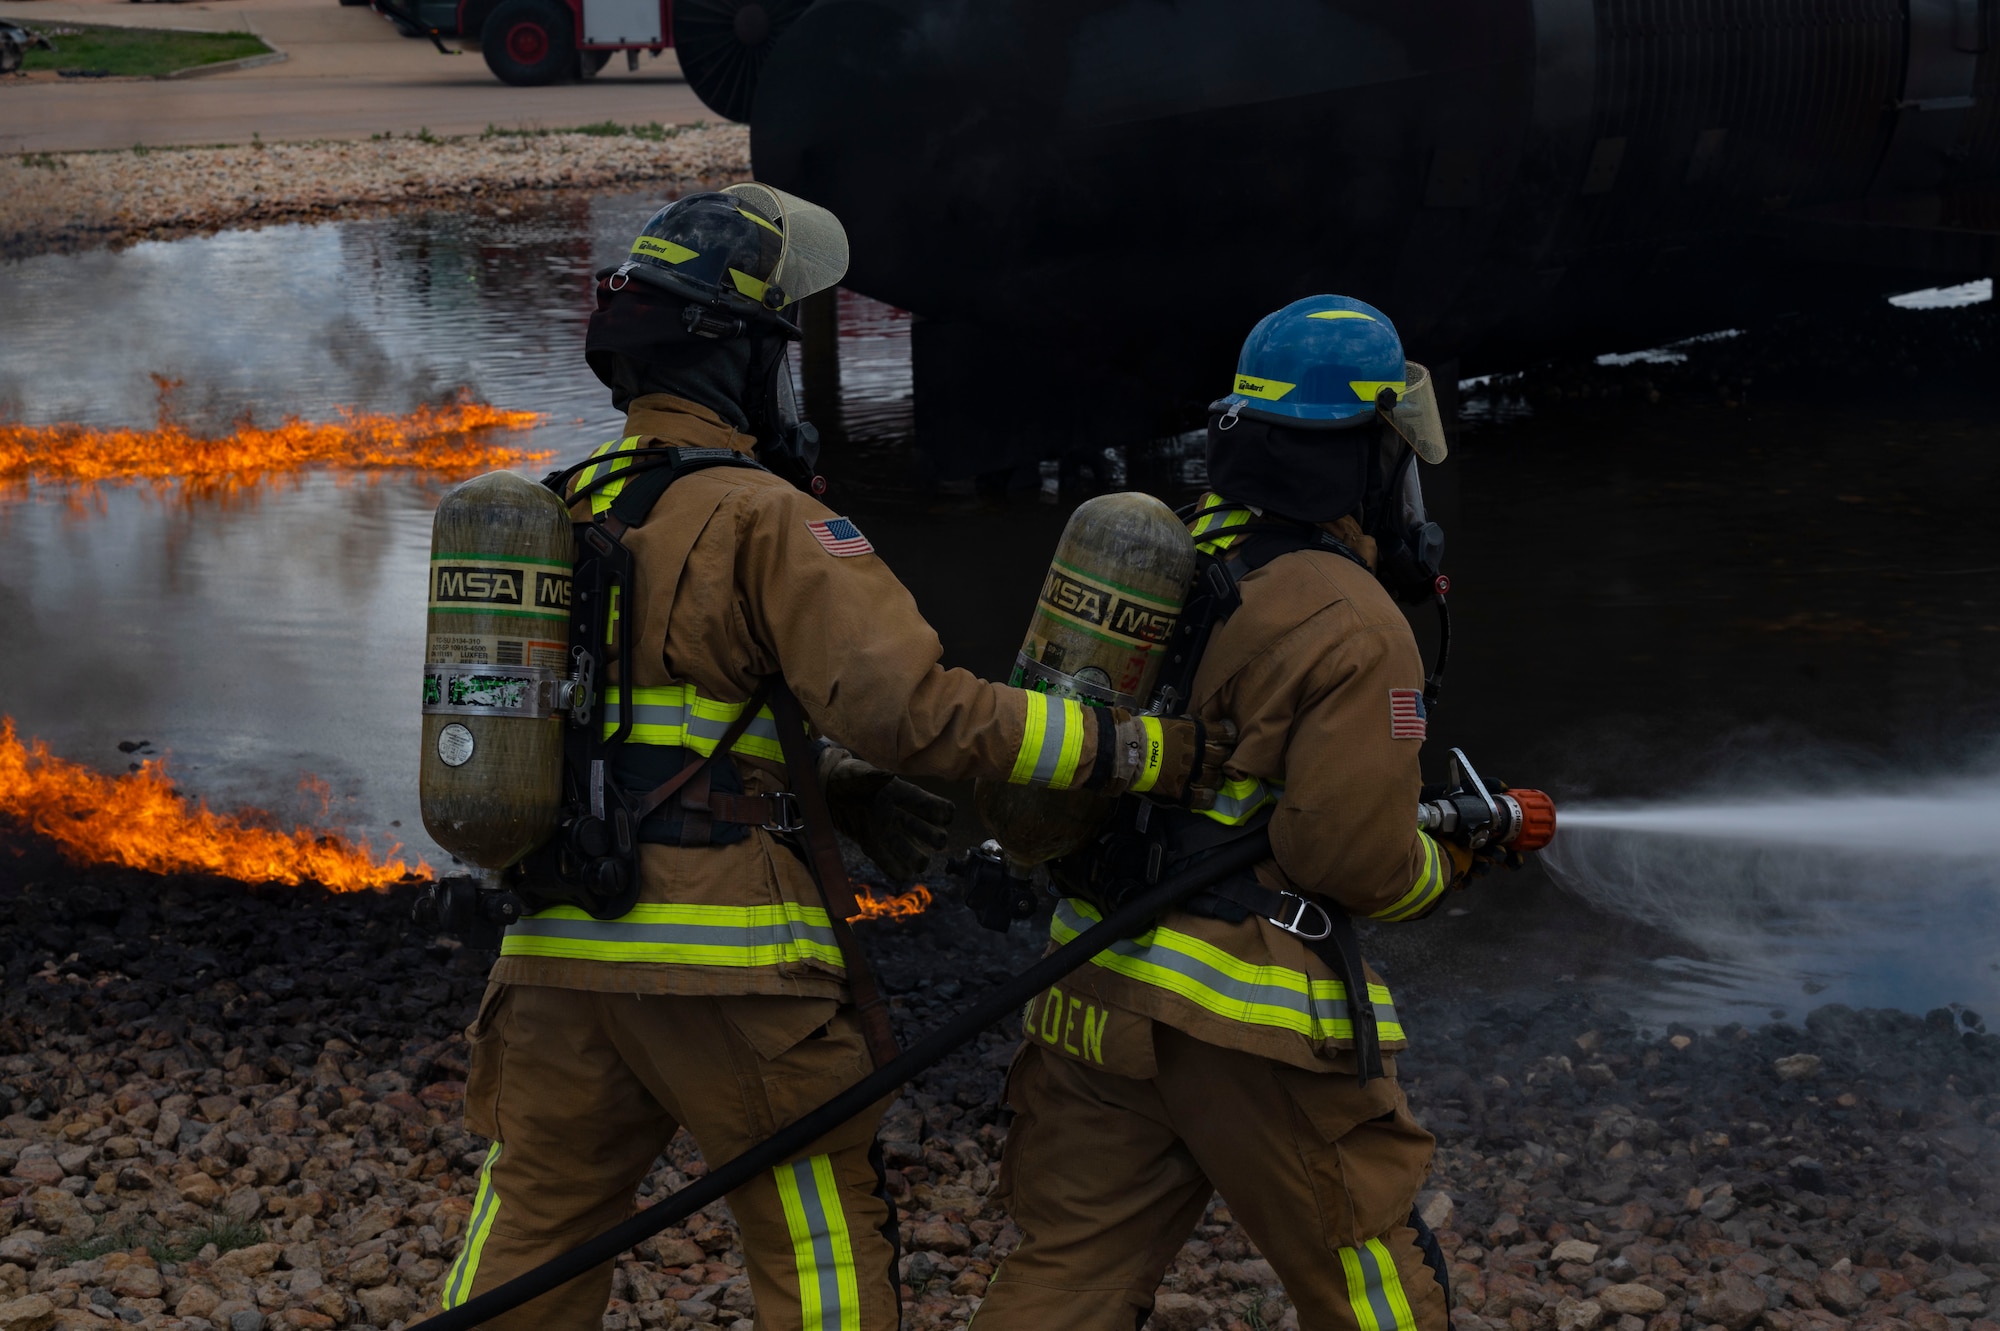 Firefighters from the 7th Civil Engineering Squadron extinguish a fire during a live fire drill on Dyess Air Force Base, Texas, April 10, 2023. Firefighters from the 7th CES trained with Dallas Fort Worth and Abilene firefighters to educate them on effectively using Ultra High-Pressure systems to extinguish fires in minimal time. The training was held to not only educate civilian firefighters on Ultra High-Pressure systems but also to strengthen the partnership with local and state fire departments. (U.S. Air Force photo by Airman Emma Anderson)